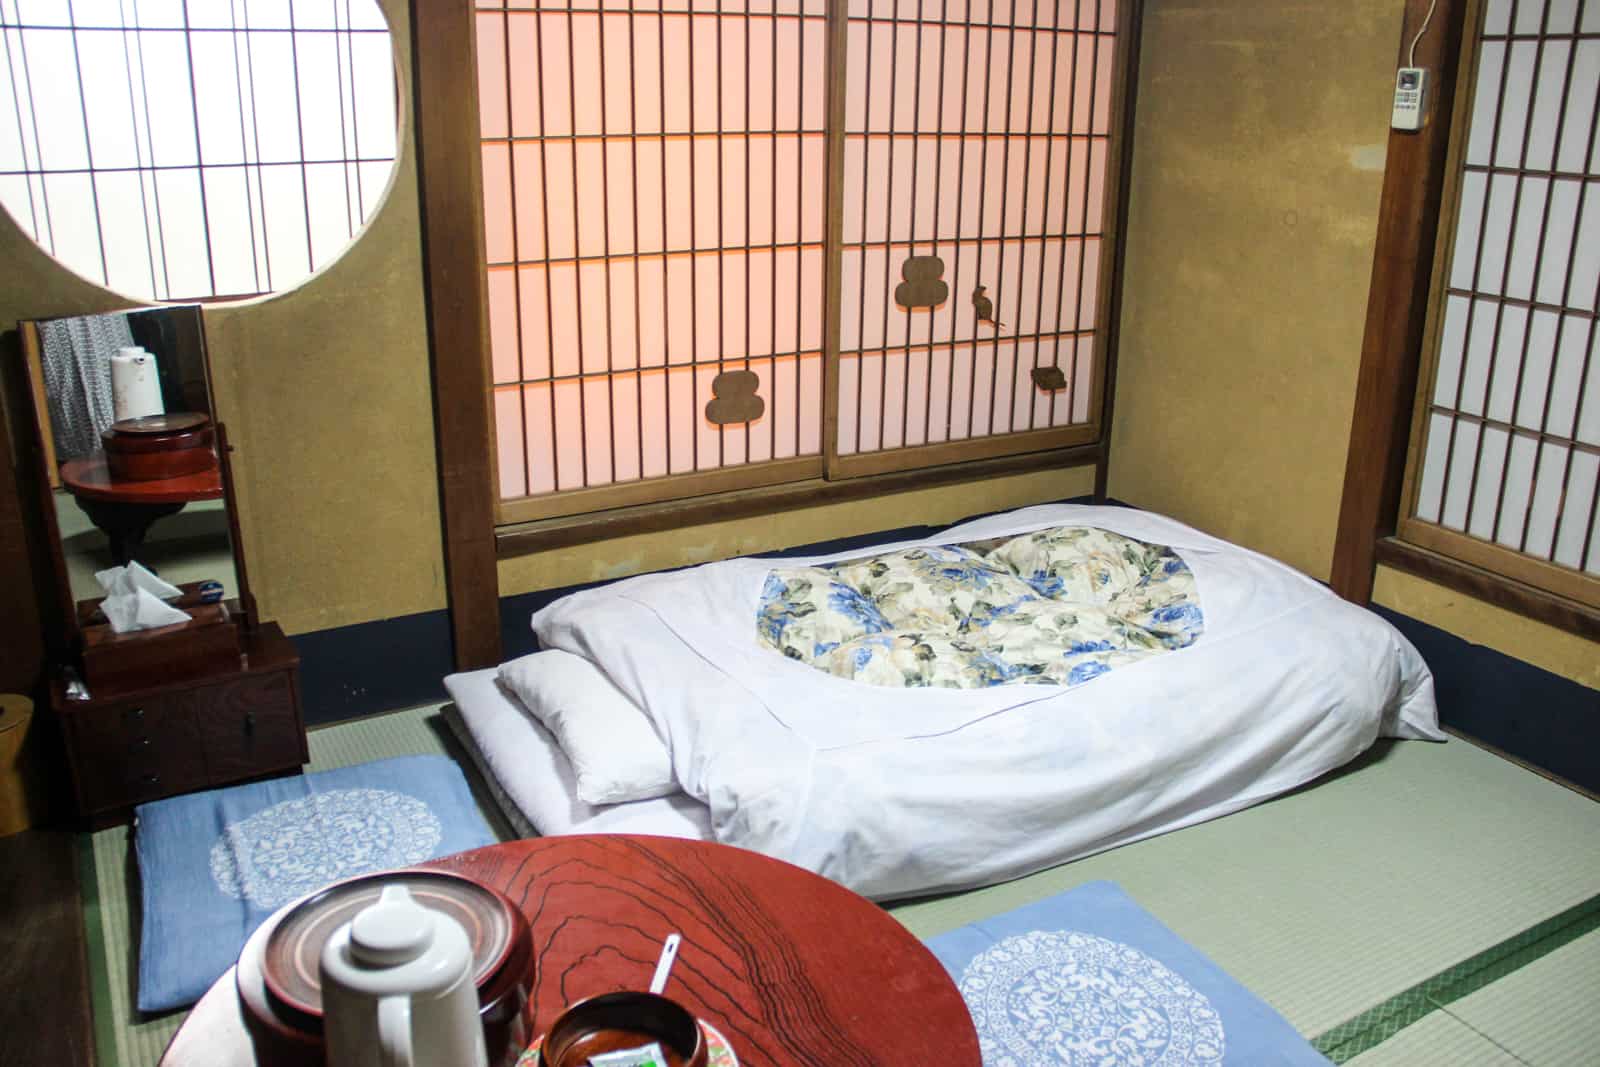 Traditional Japanese accommodation with shuttered windows, a floor bed and tea table - known as a Ryoken.